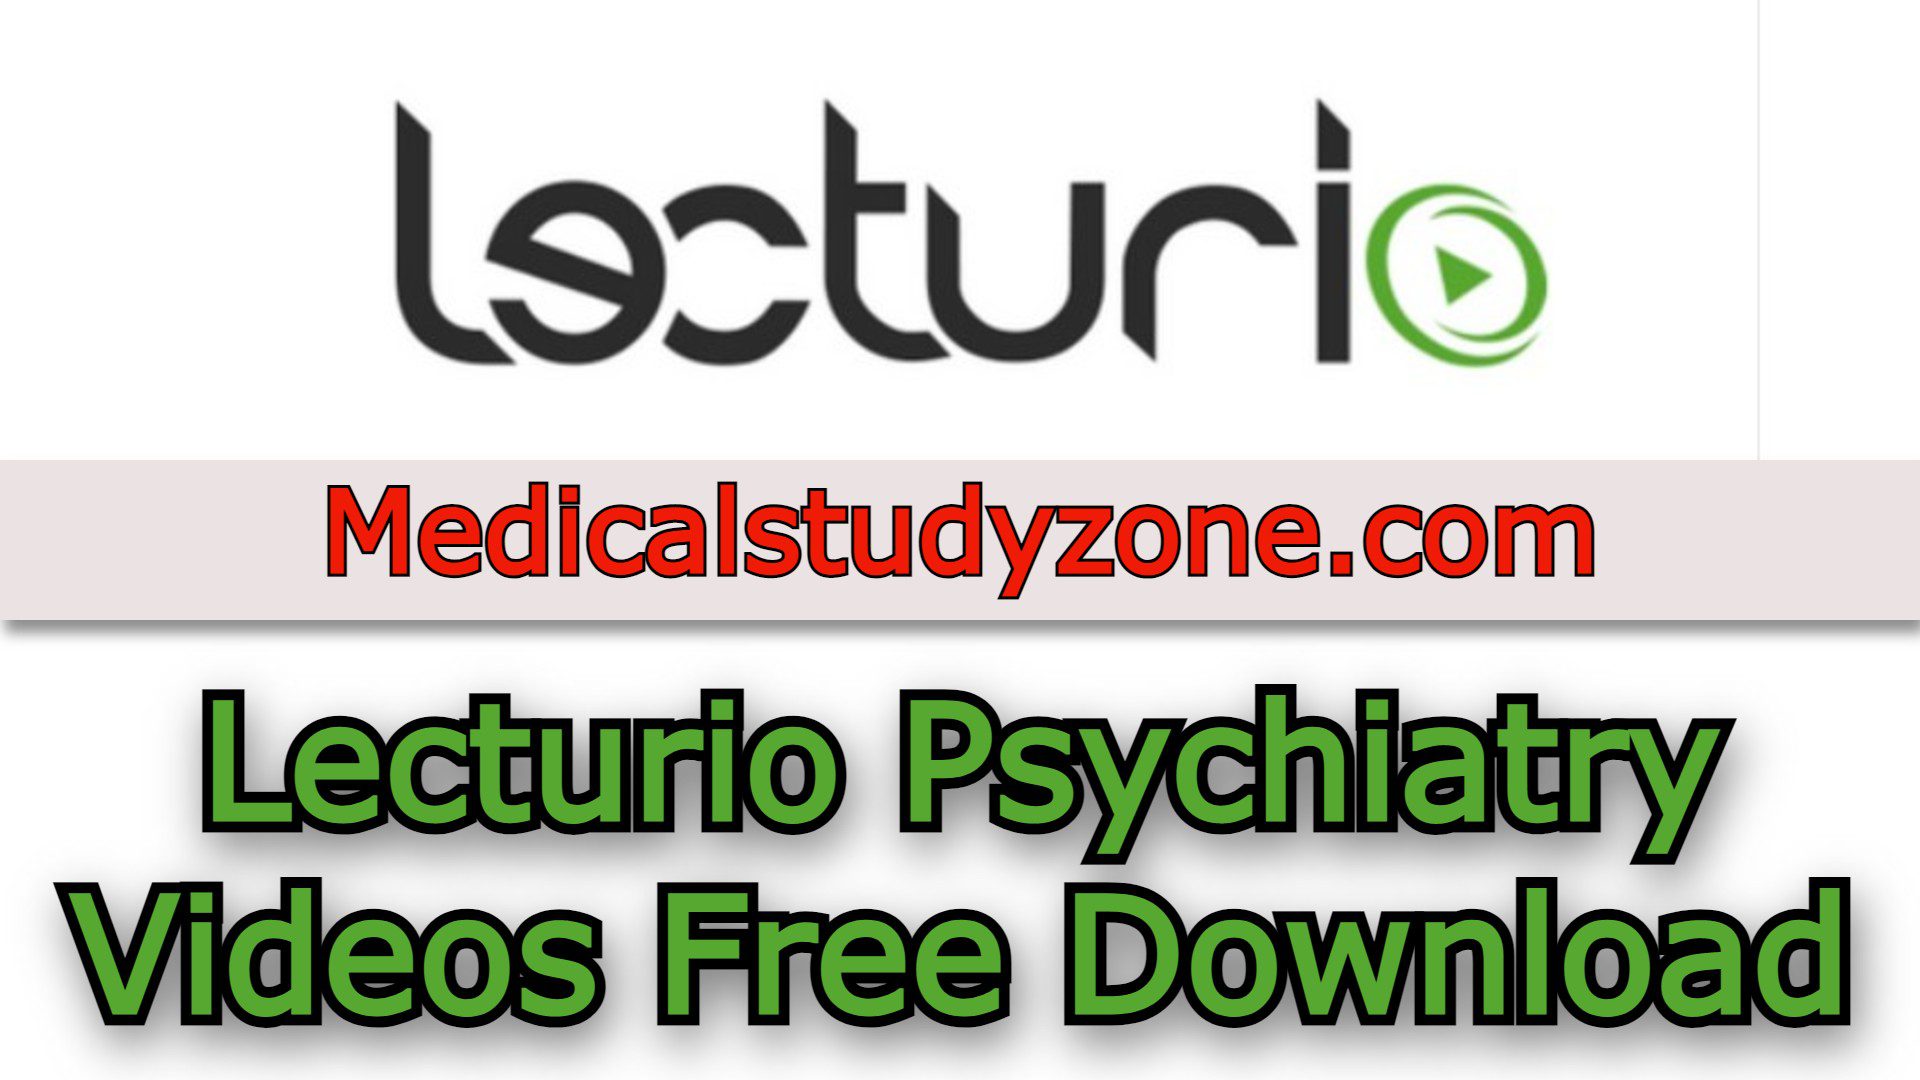 Lecturio Psychiatry Videos 2022 Free Download